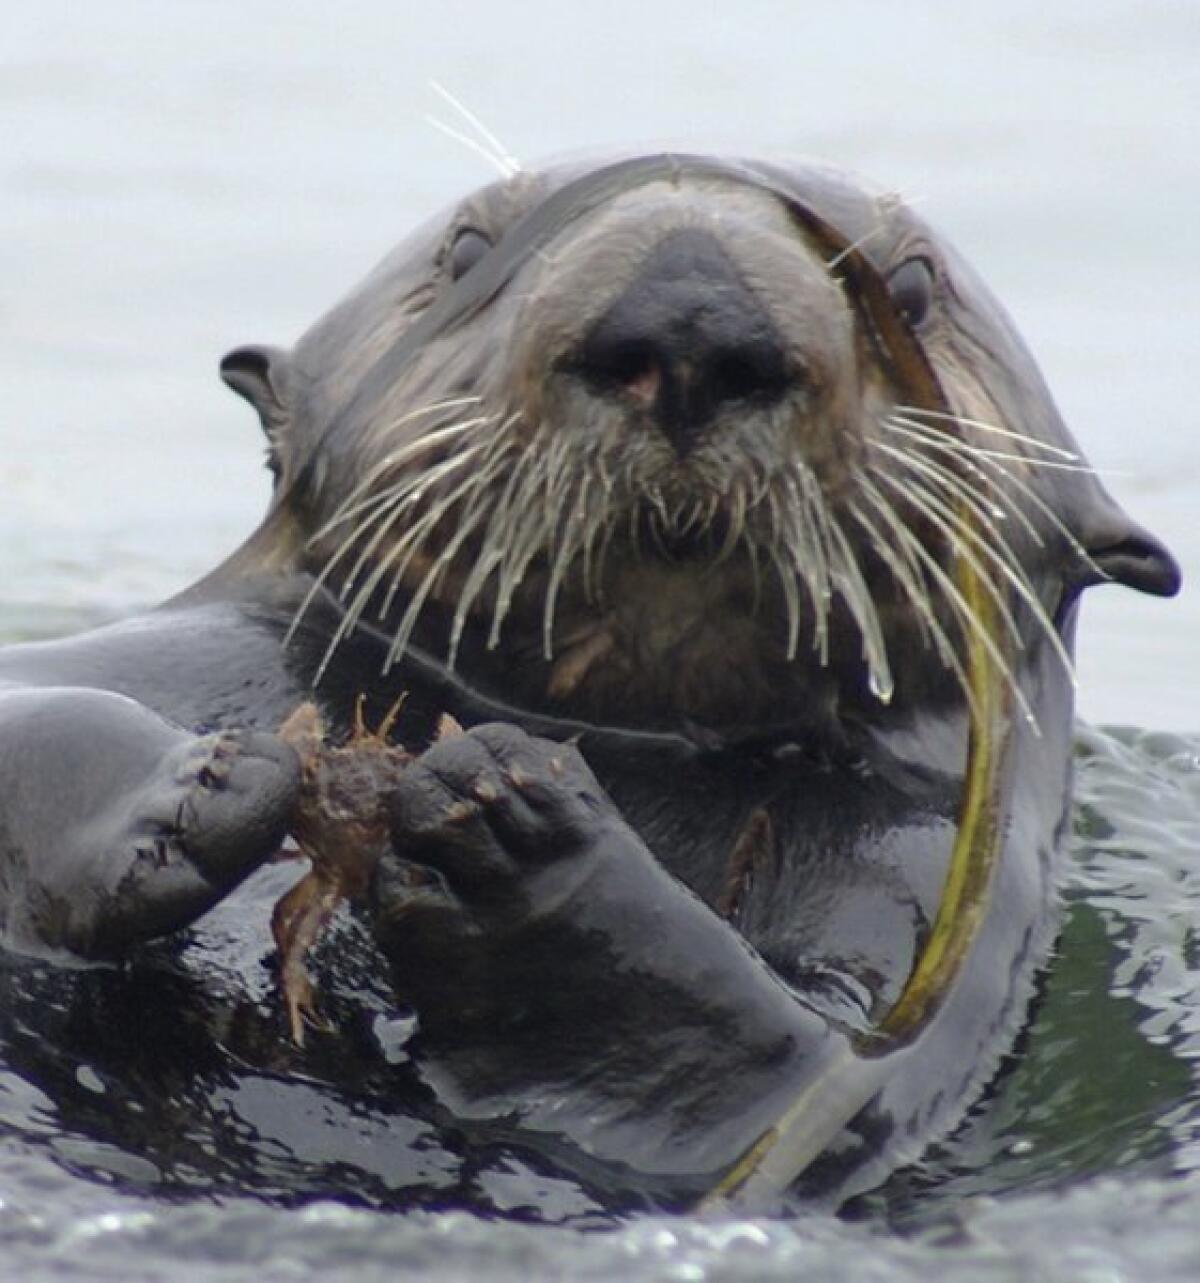 A study links sea otters to improved seagrass growth in Elkhorn Slough, a major estuary in Monterey Bay.